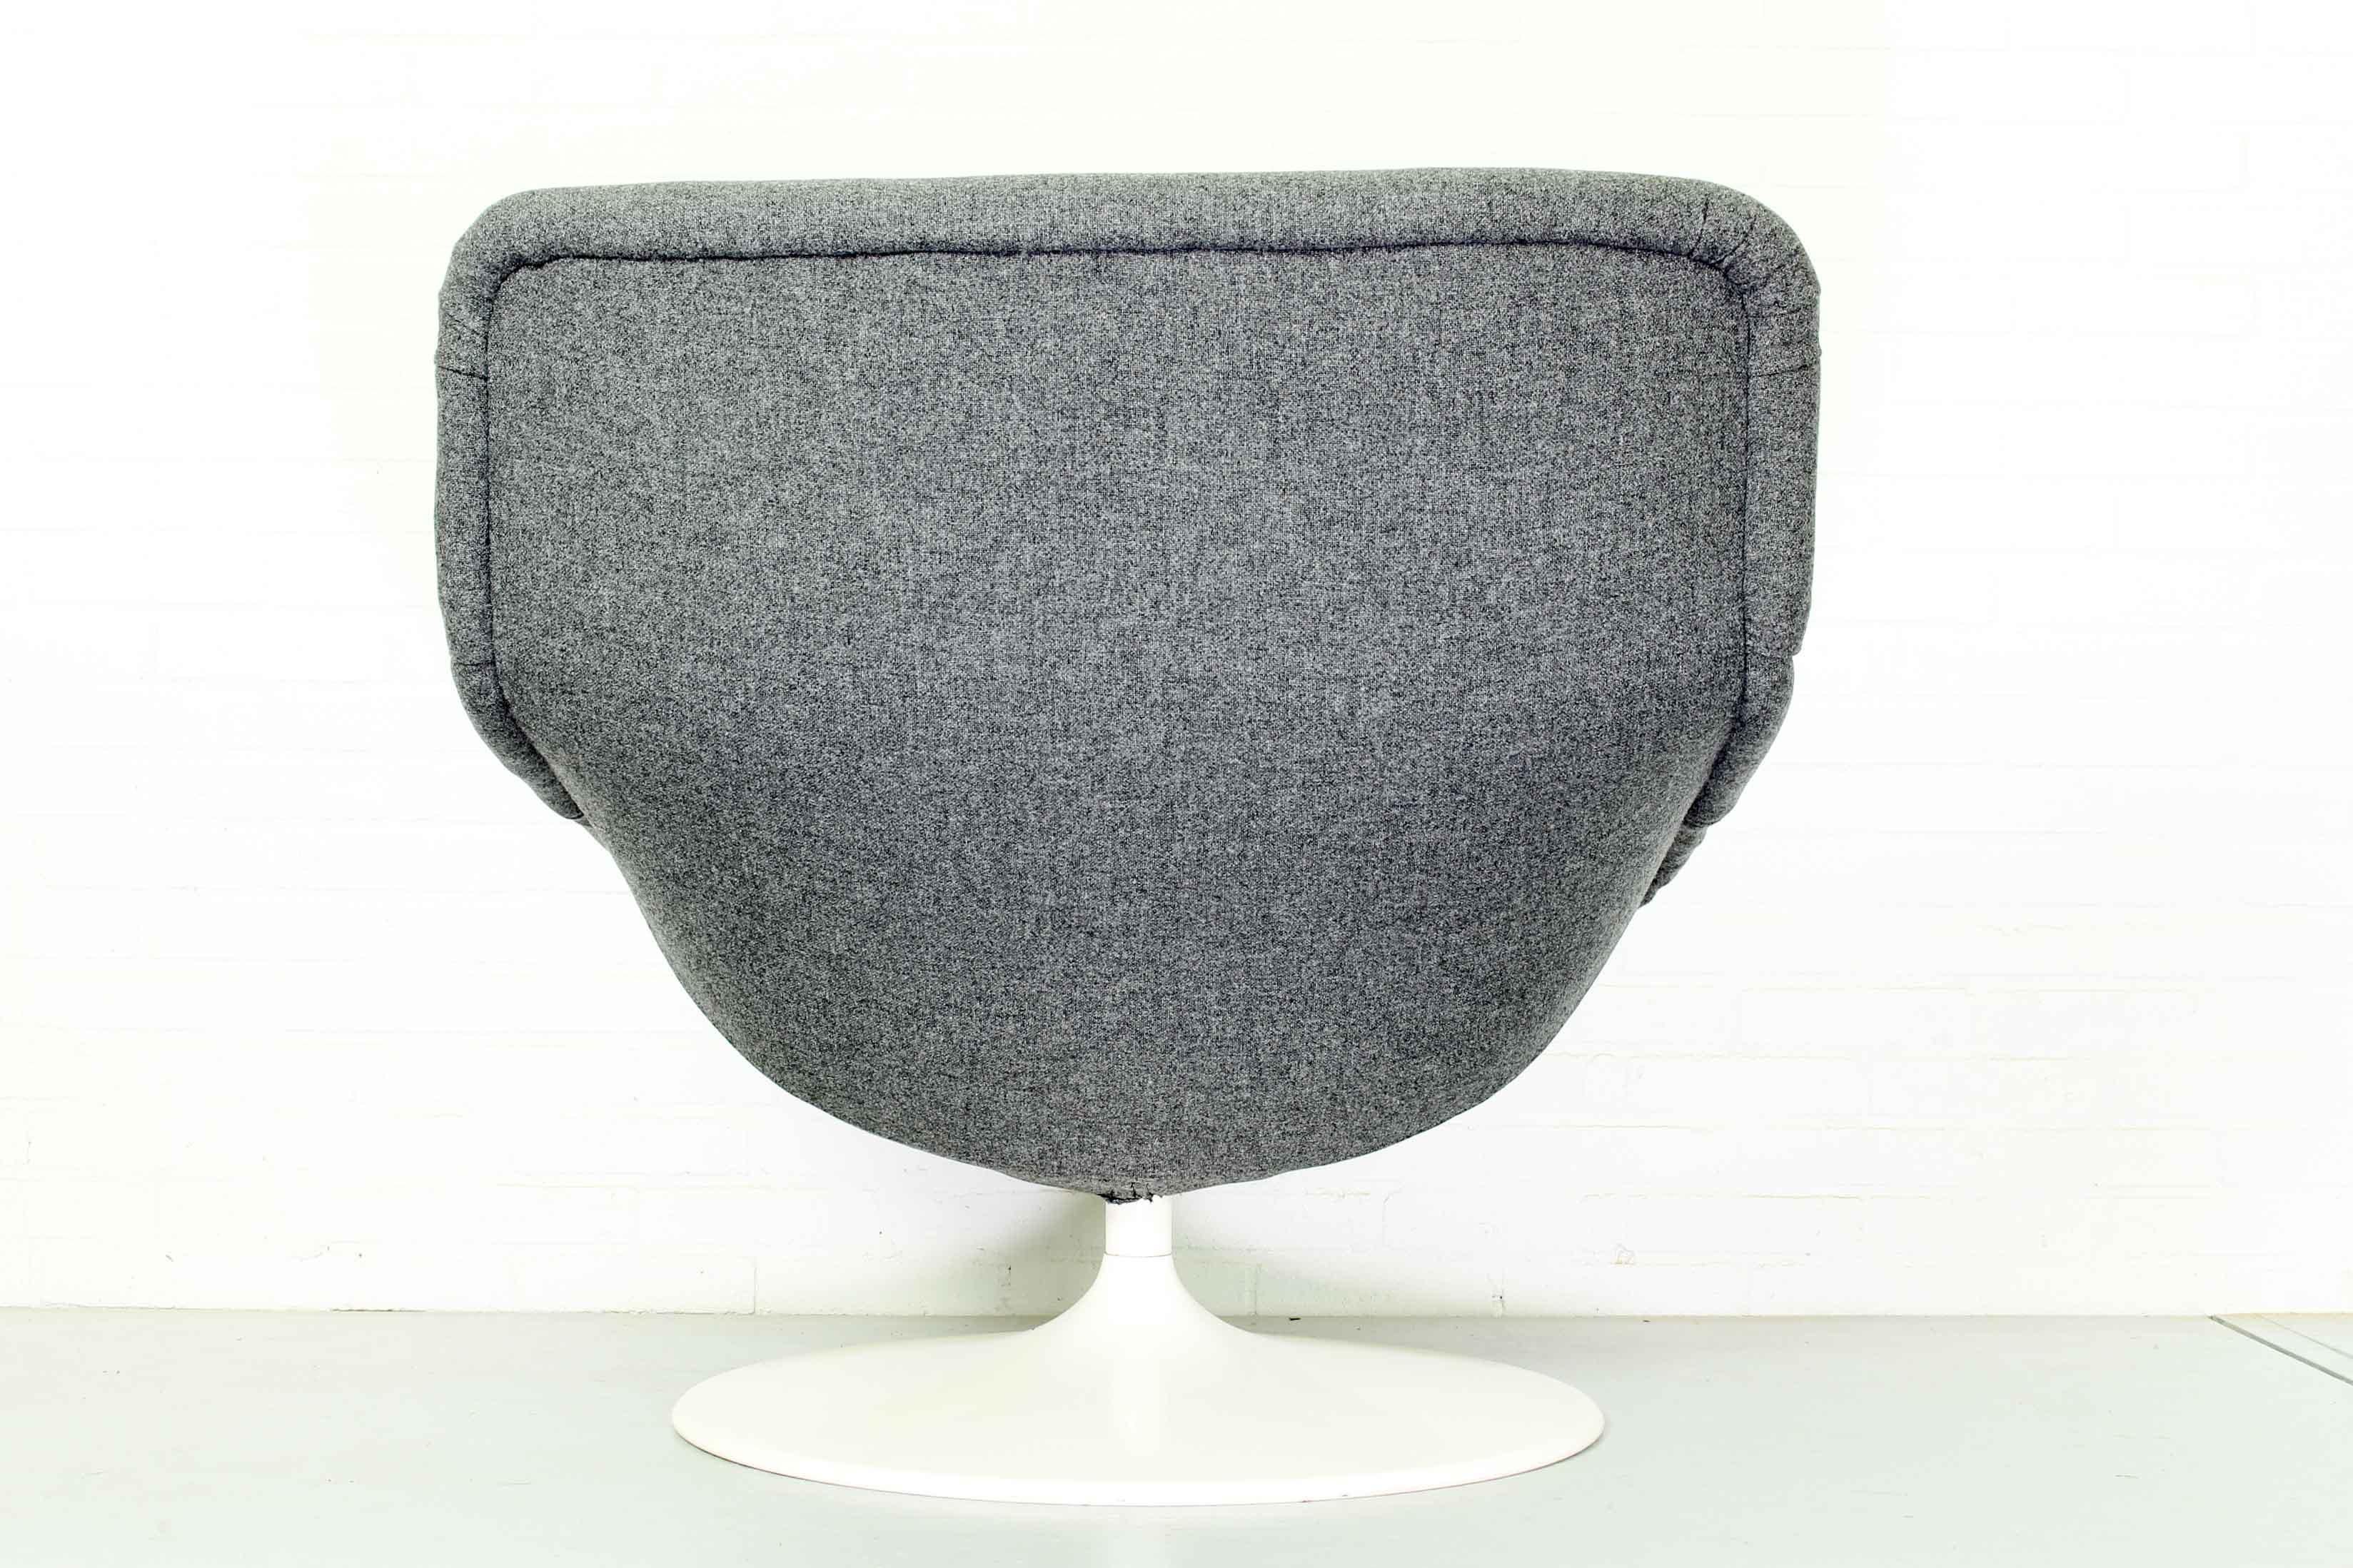 Lounge chair by Geoffrey Harcourt for Artifort, 1980. This chair does not swivel. Model F518. Re-upholsterd with high quality grey fabric Kvadrat Tonica. In a very good condition.
  